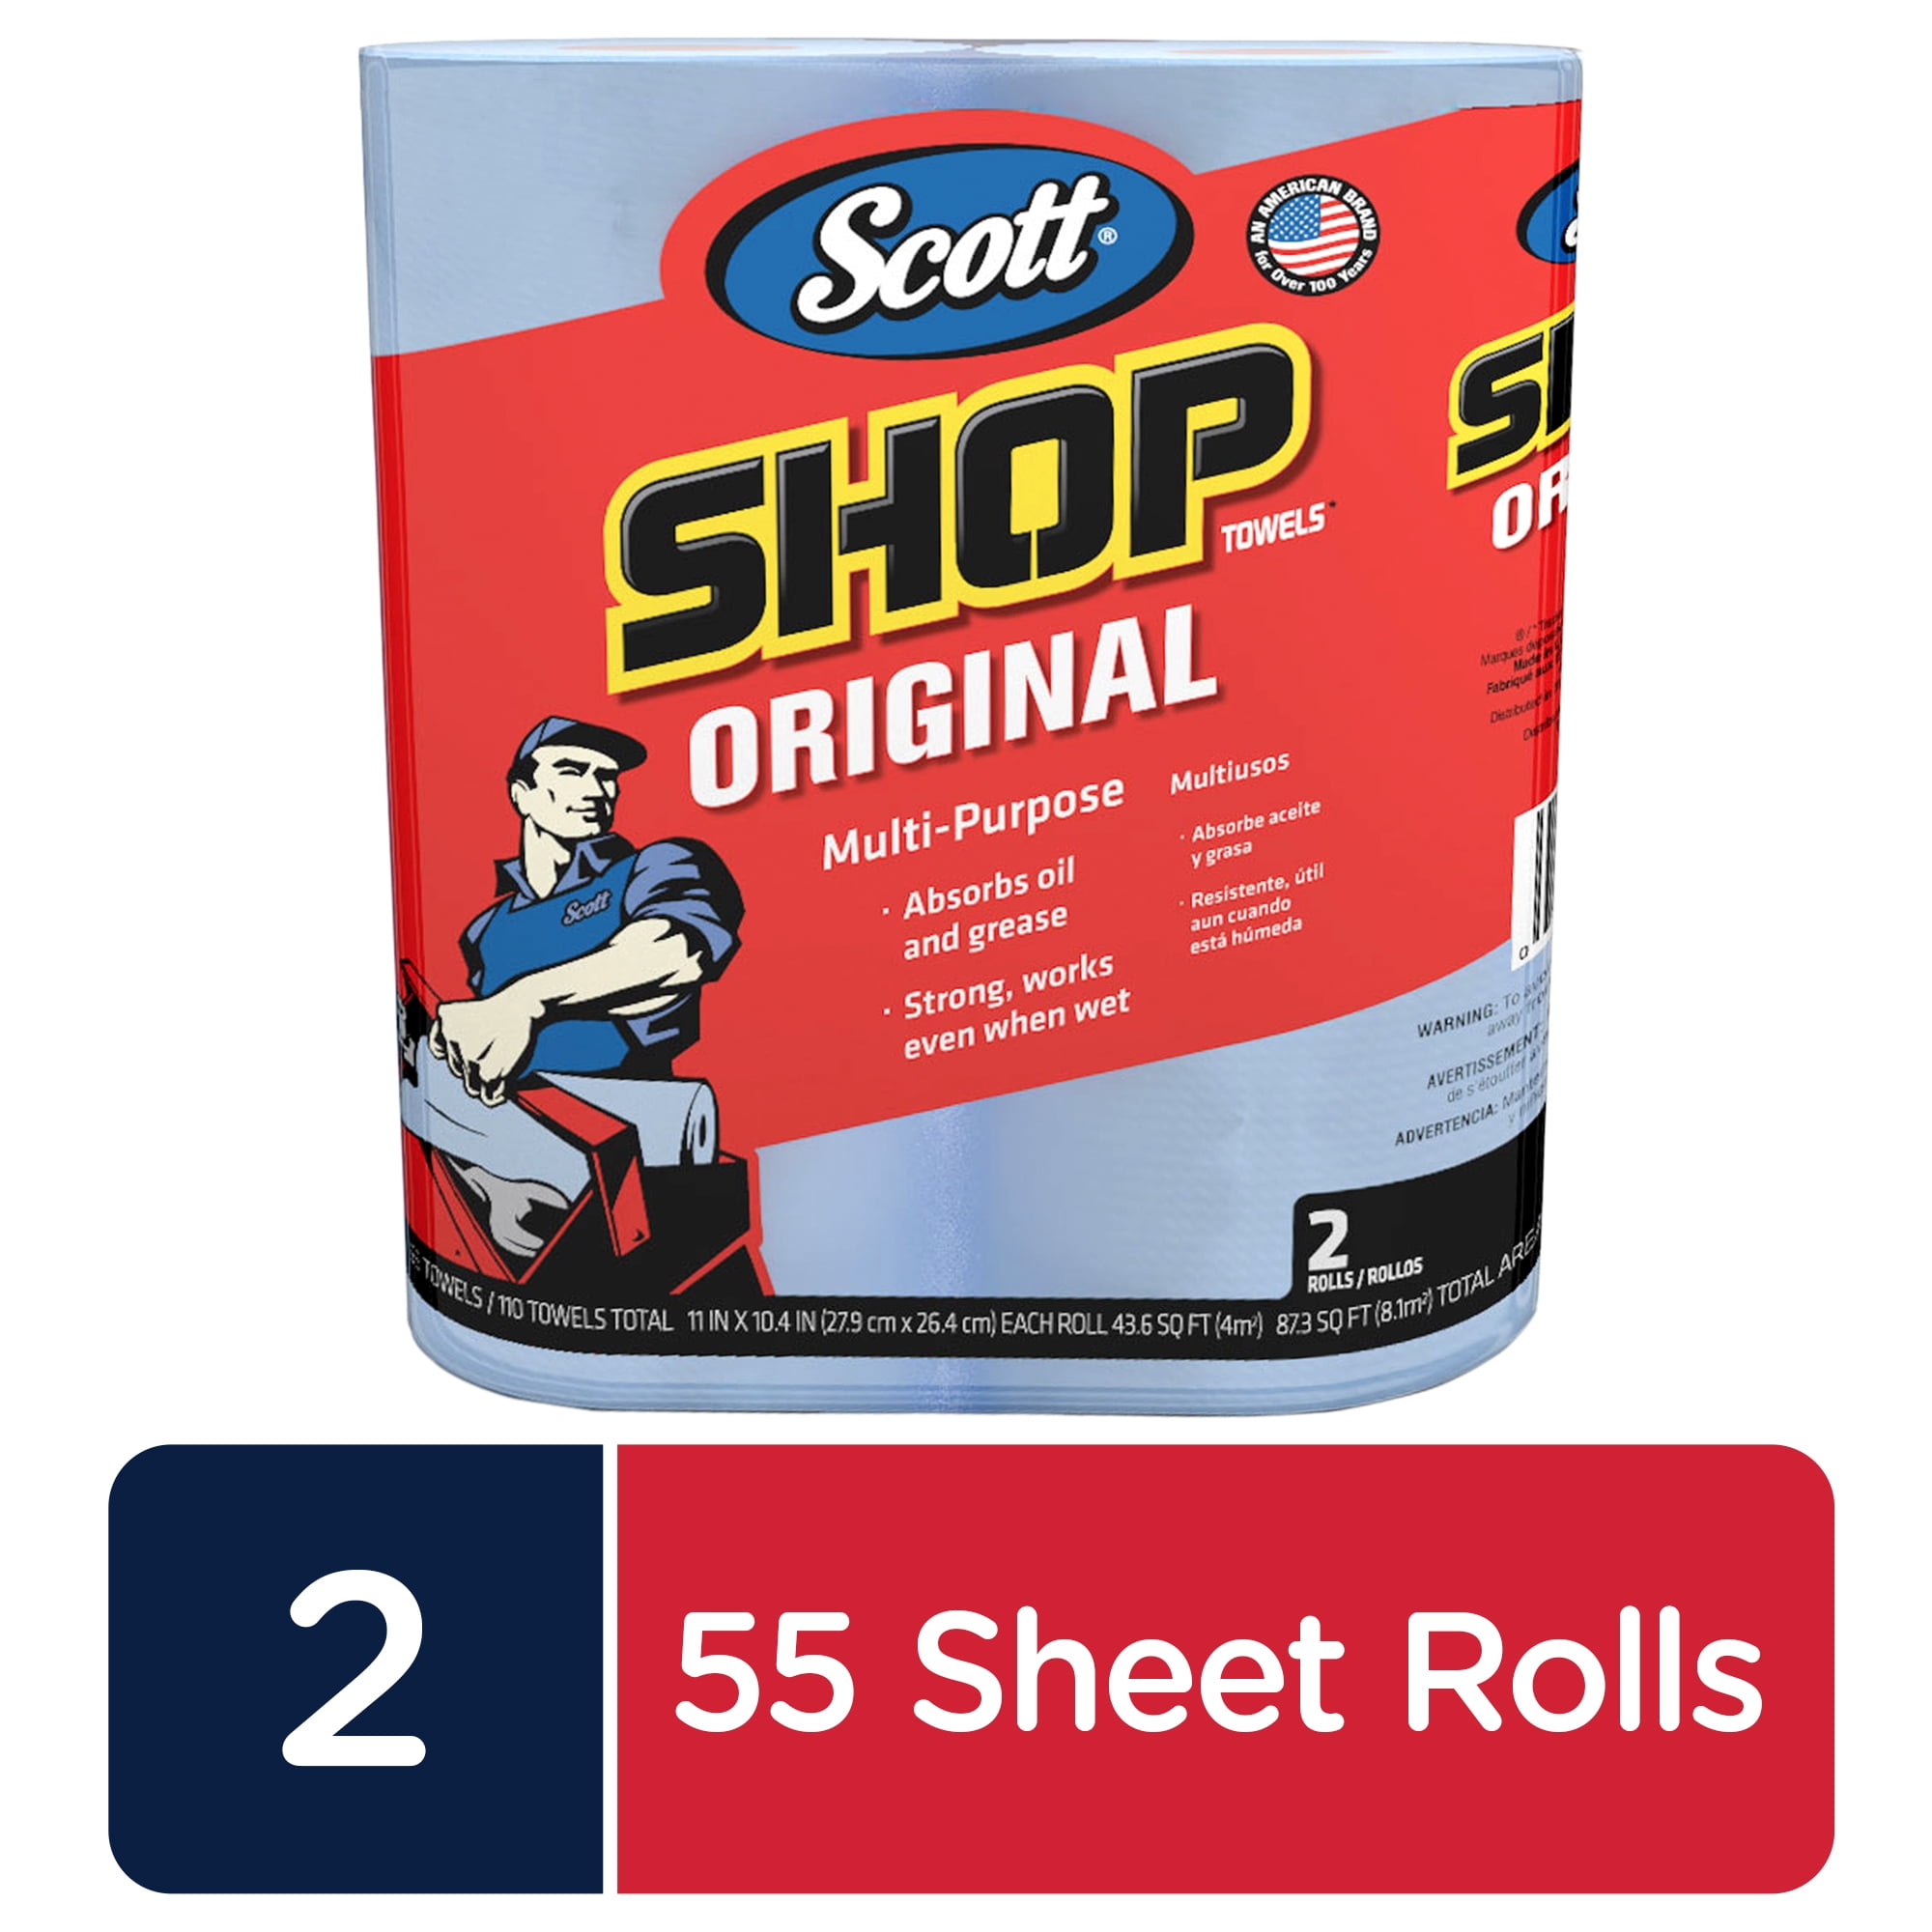 Scott Multi Purpose Shop Cleaning Towels 20 Rolls Disposable Wipes Pack Offer 